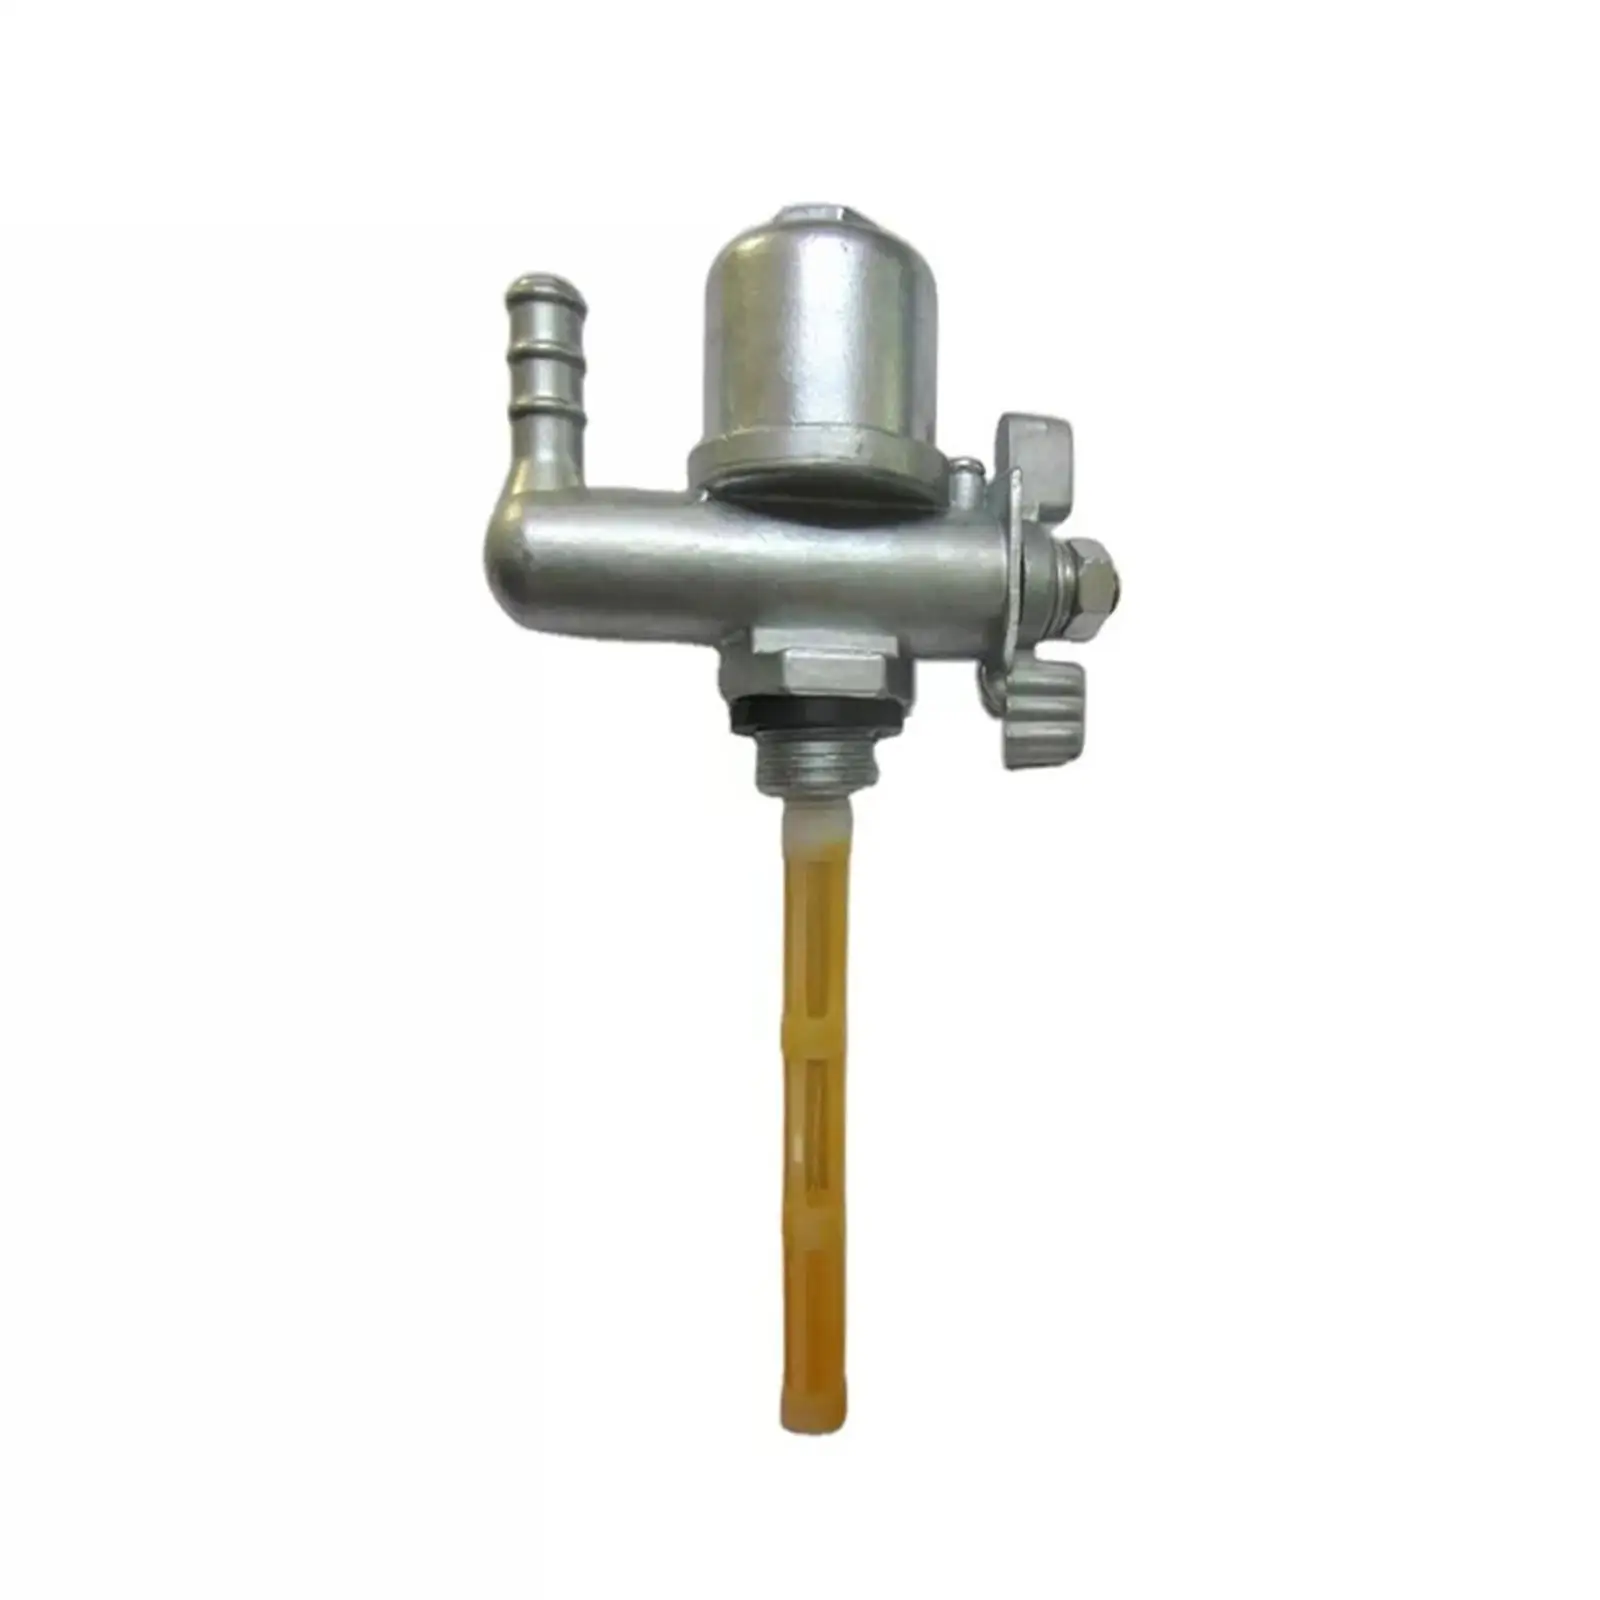 Motorcycle fuel Switch Pump Valve Petcock Replacement Fits for Ruassia Msk